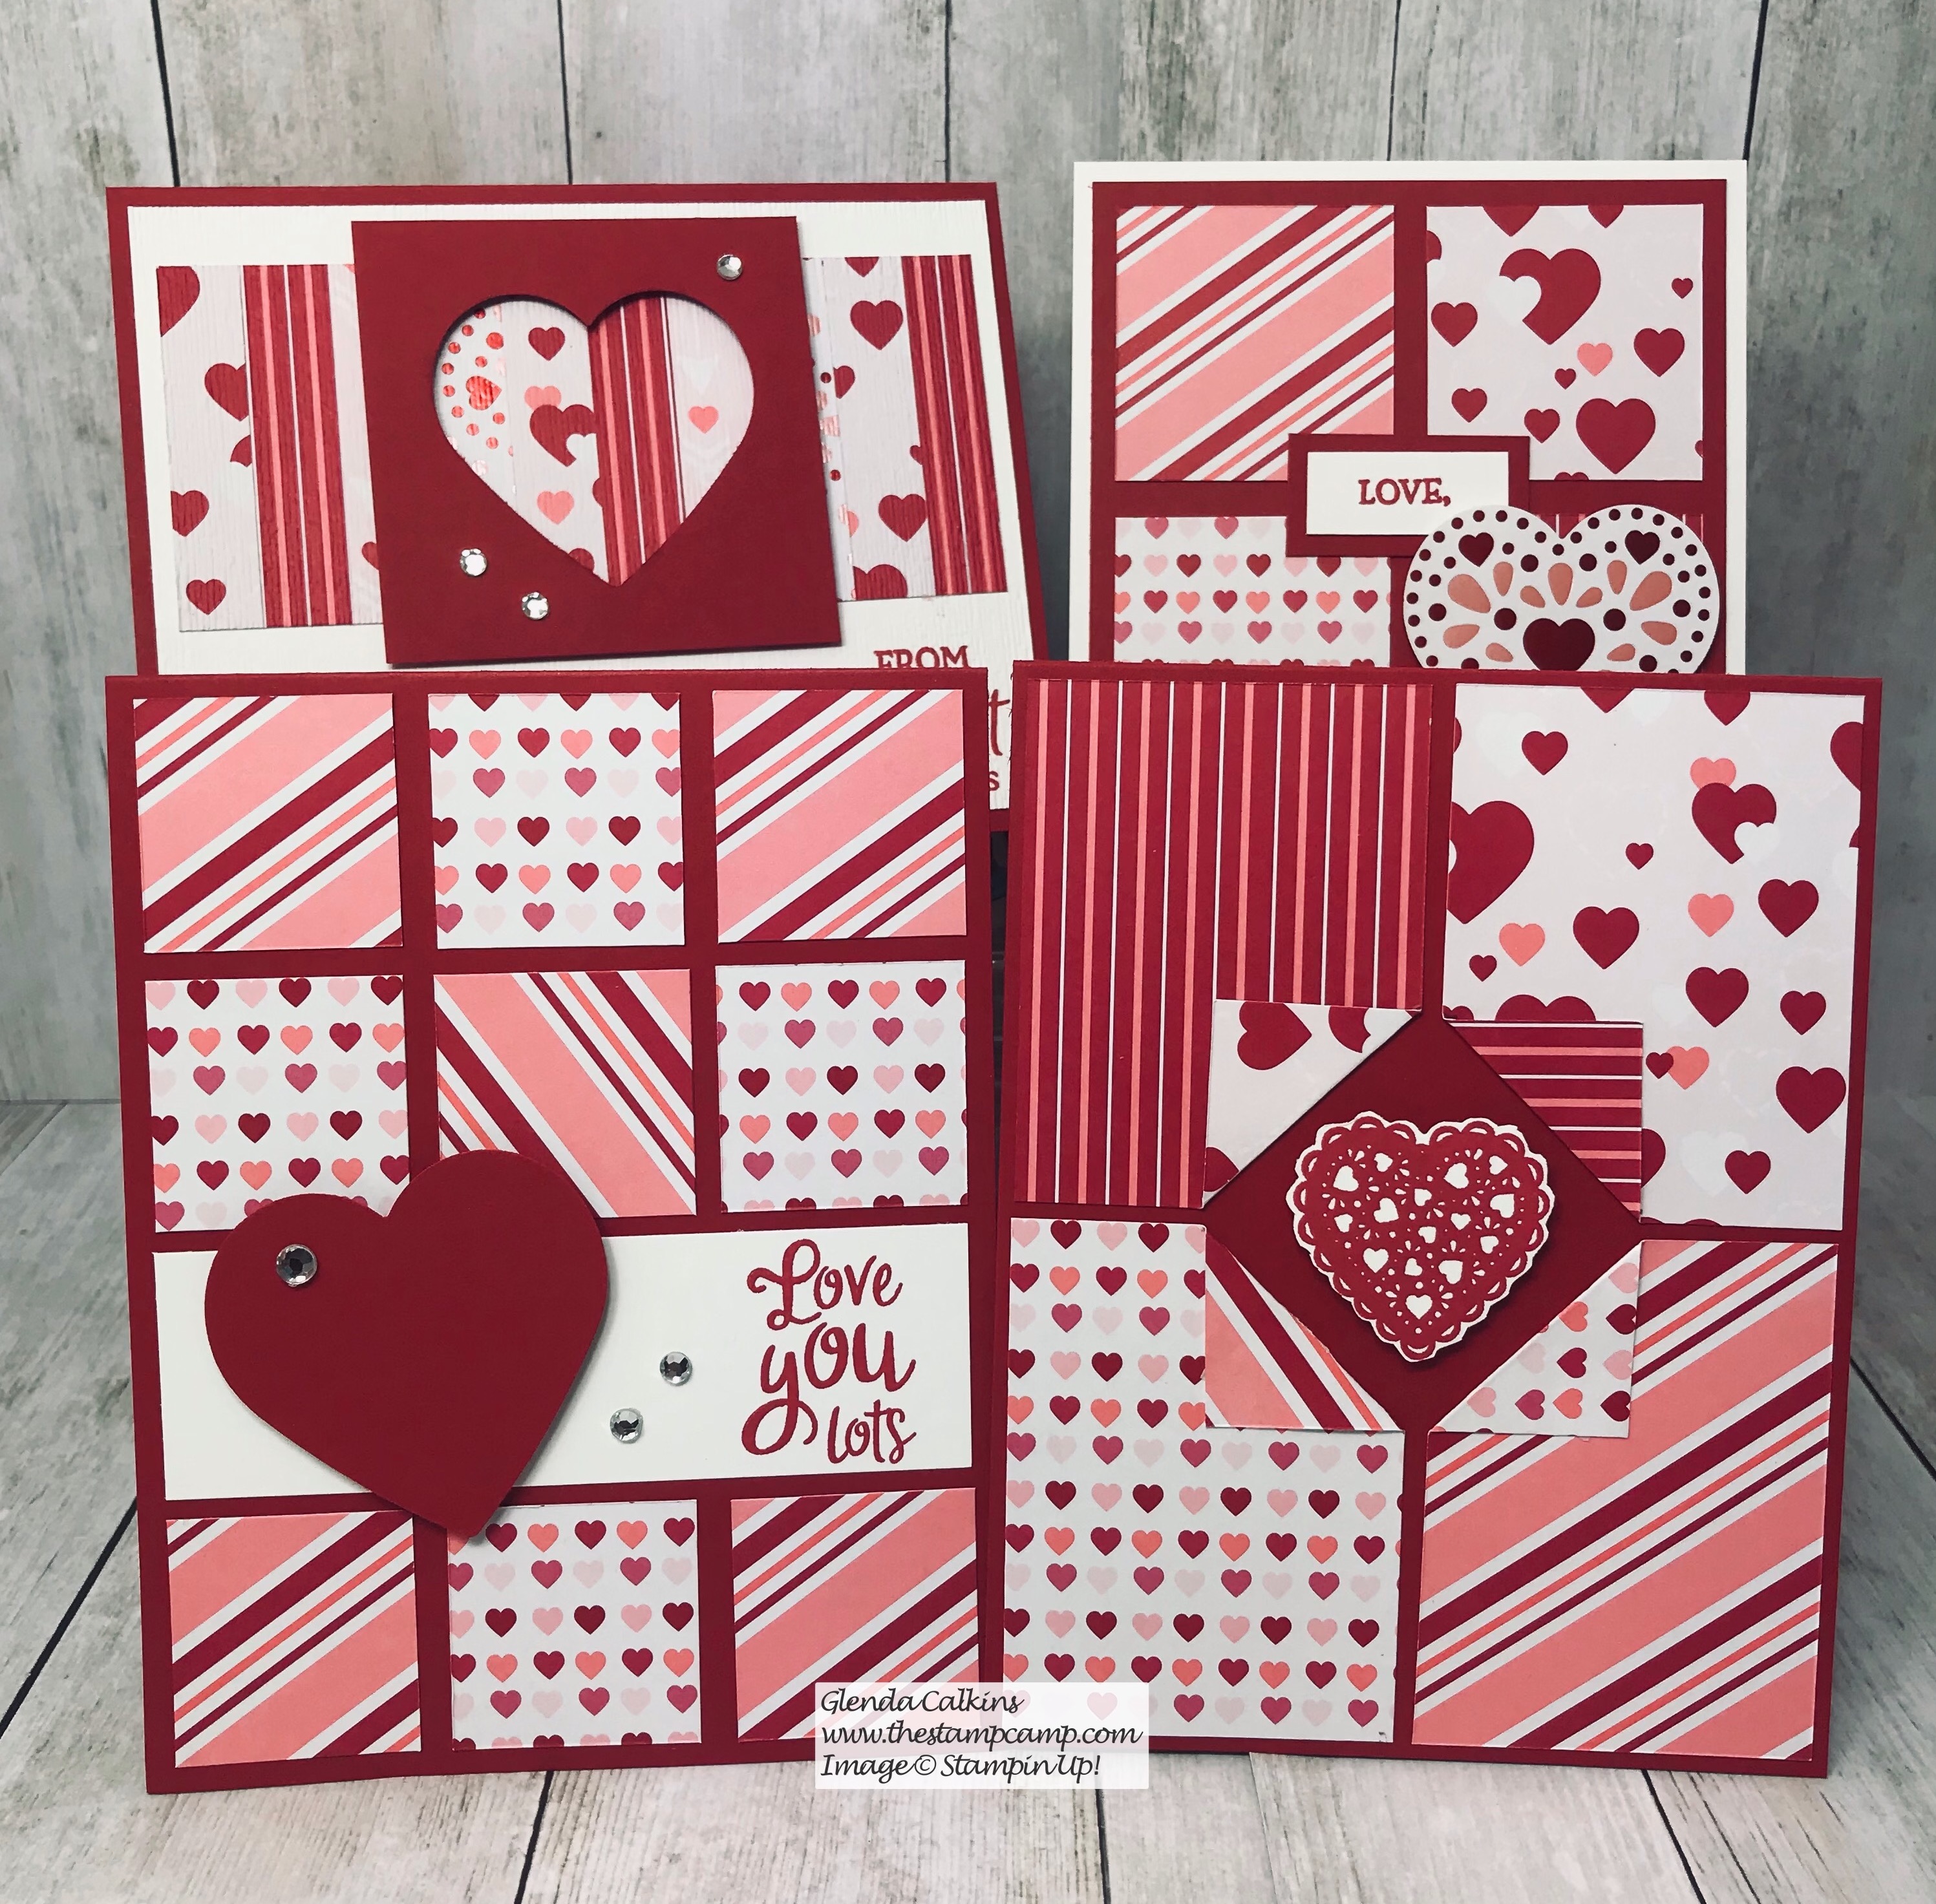 My Heartfelt Bundle Class Option #1 gives you the stamp set; Specialty Designer Series Paper, PDF file, Cut card stock to create 4 cards with envelopes. Details on my blog here: https://wp.me/p59VWq-aFR #stampinup #Valentines #thestampcamp #sketches